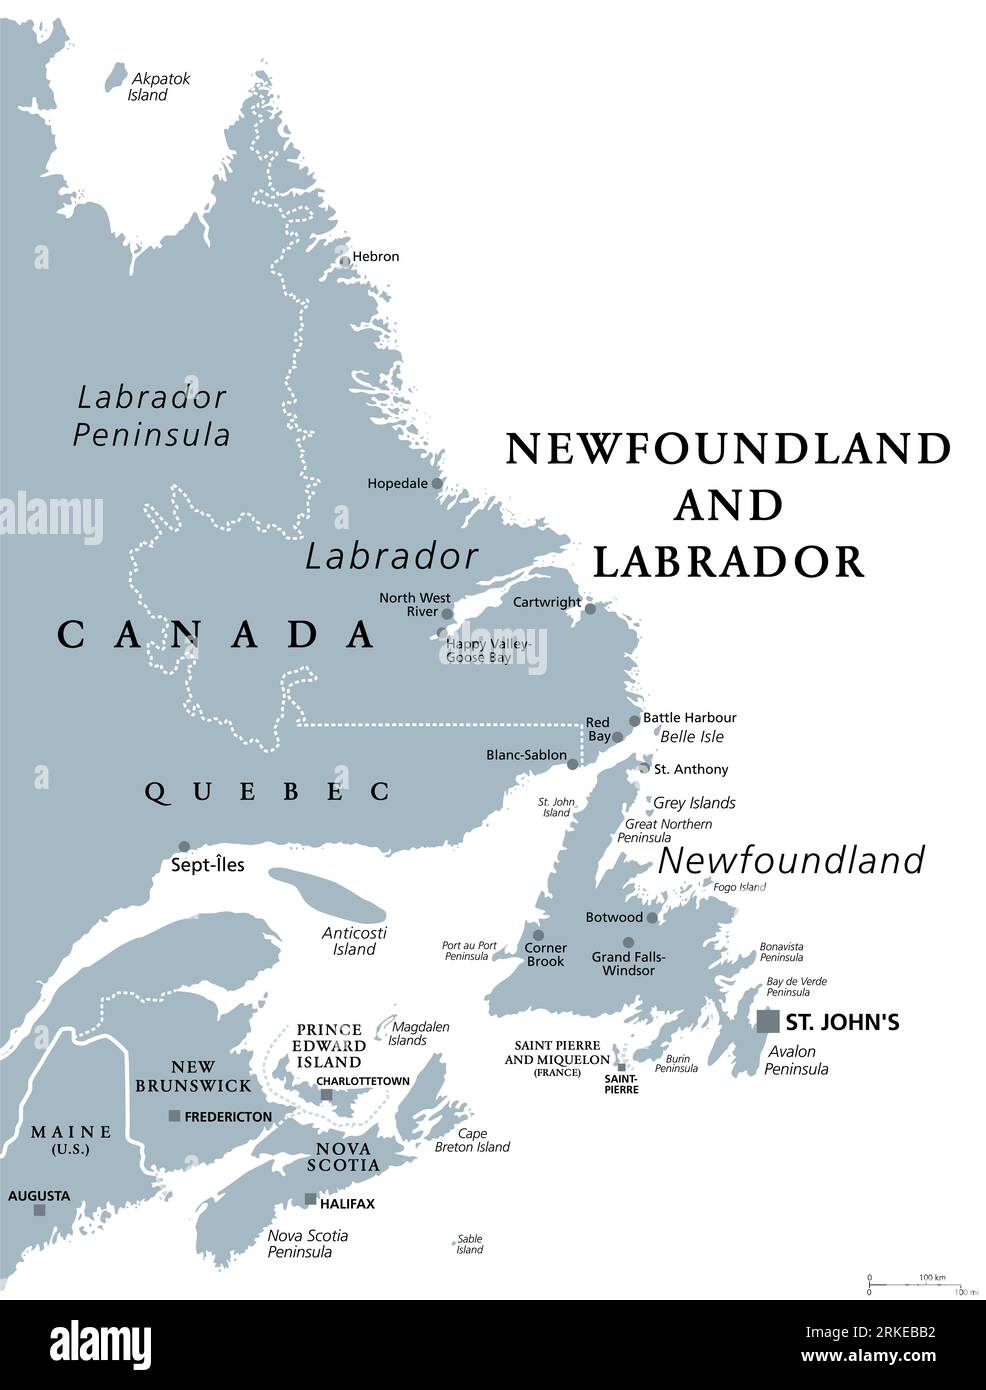 Newfoundland and Labrador, gray political map. Province of Canada, in the Atlantic region. With capital St. Johns, Newfoundland and Labrador. Stock Photo